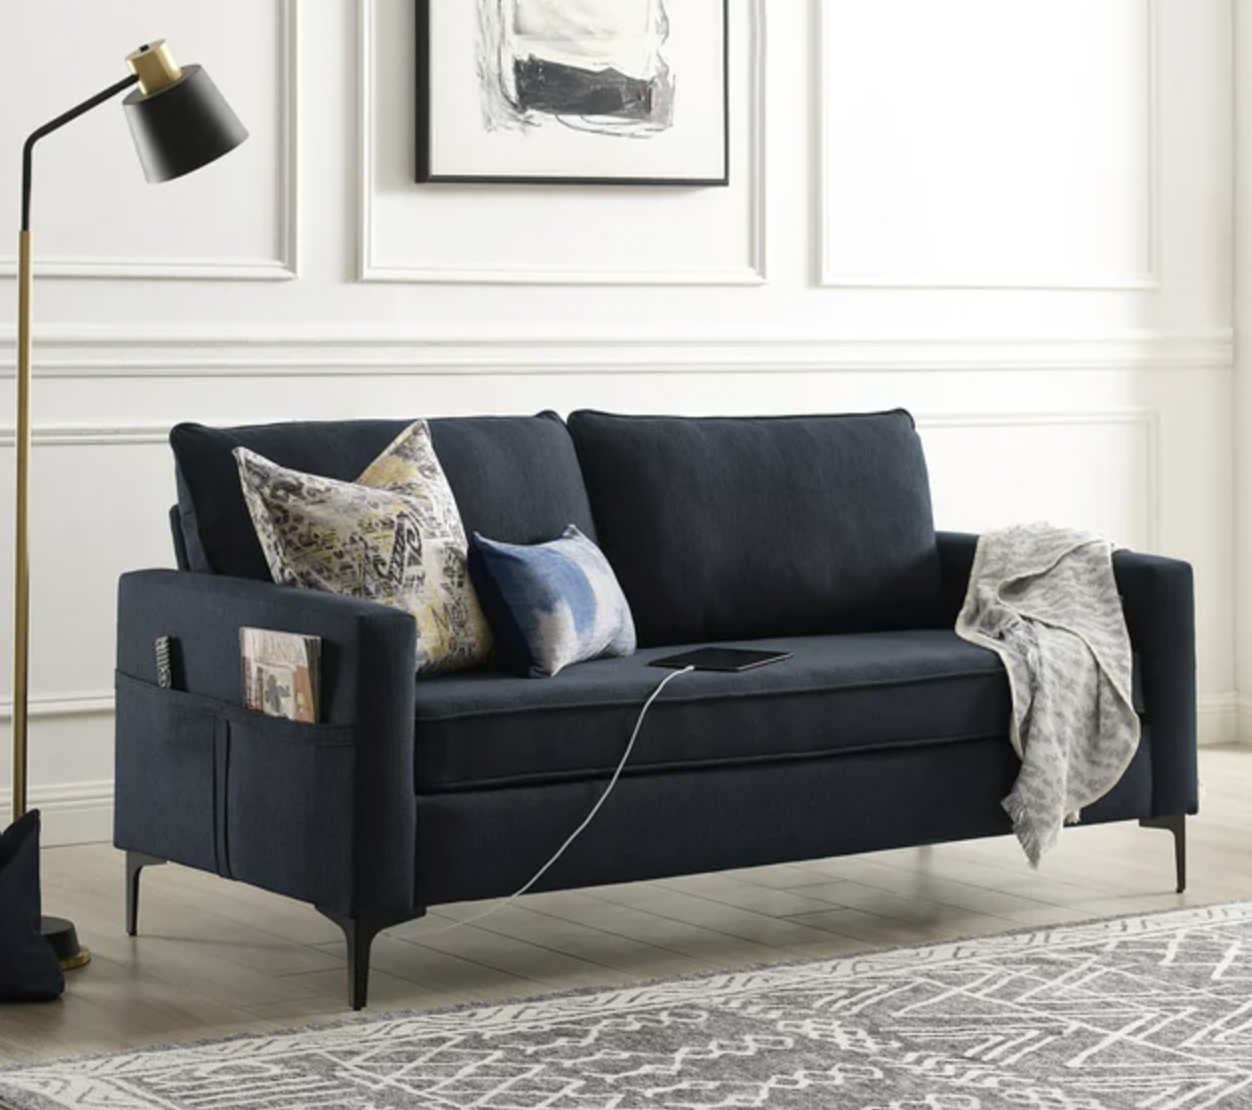 the couch in navy